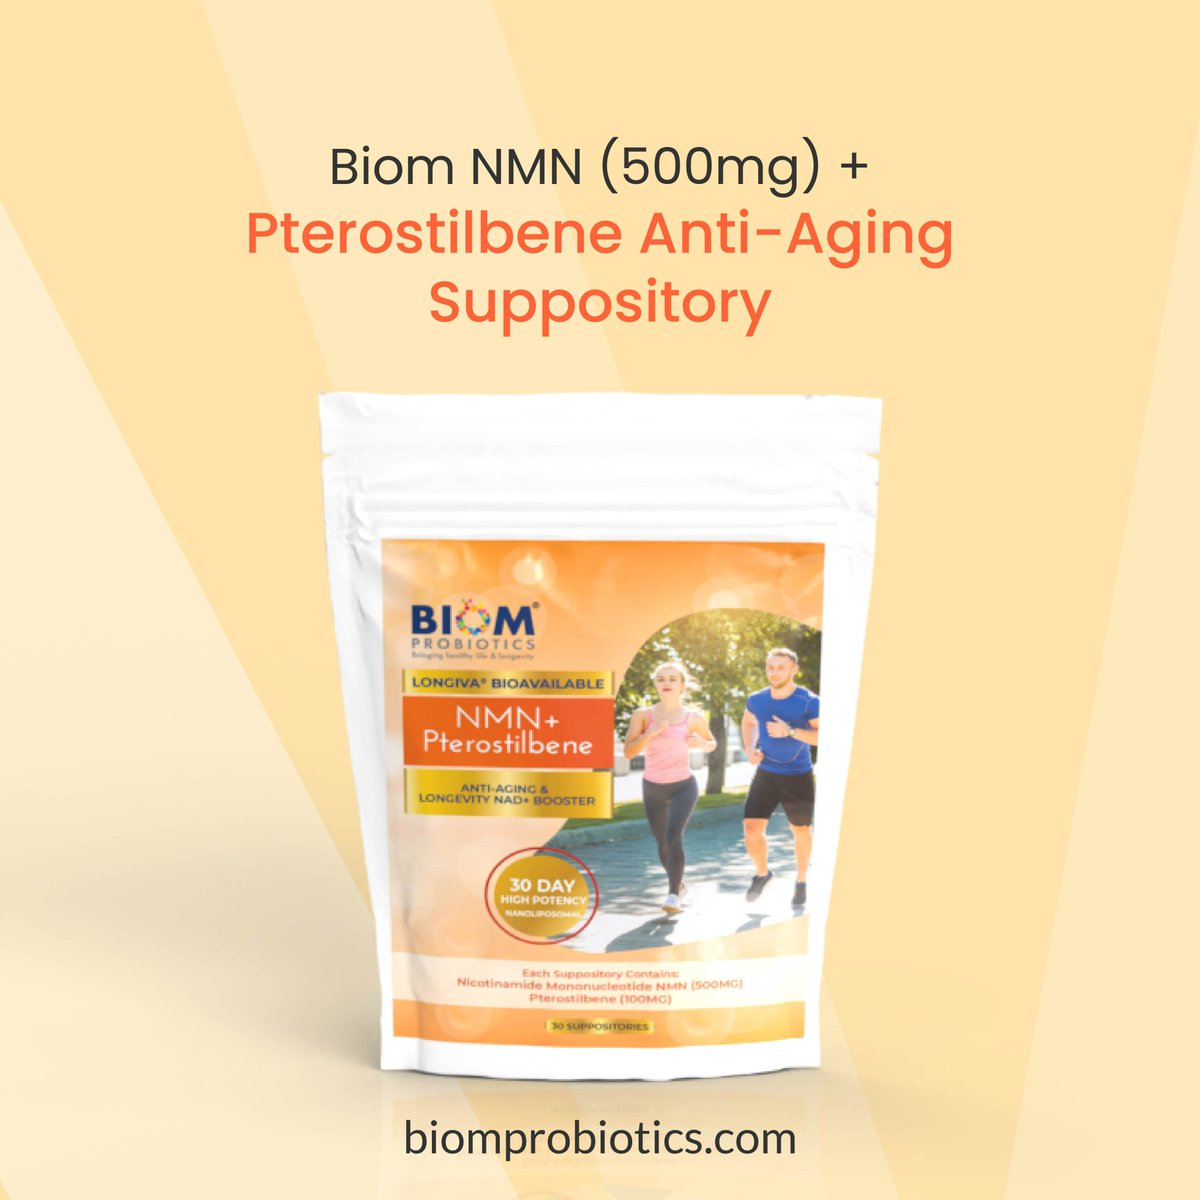 NMN (Nicotinamide Mononucleotide) & Pterostilbene, powerful compounds known for their anti-aging properties, are combined in a convenient suppository form.

Buy: bit.ly/3RYU1fX

#AntiAgingRevolution #BiomNMN #AntiAging #YouthfulVibes #BiomNMN #Pterostilbene #HealthyAging